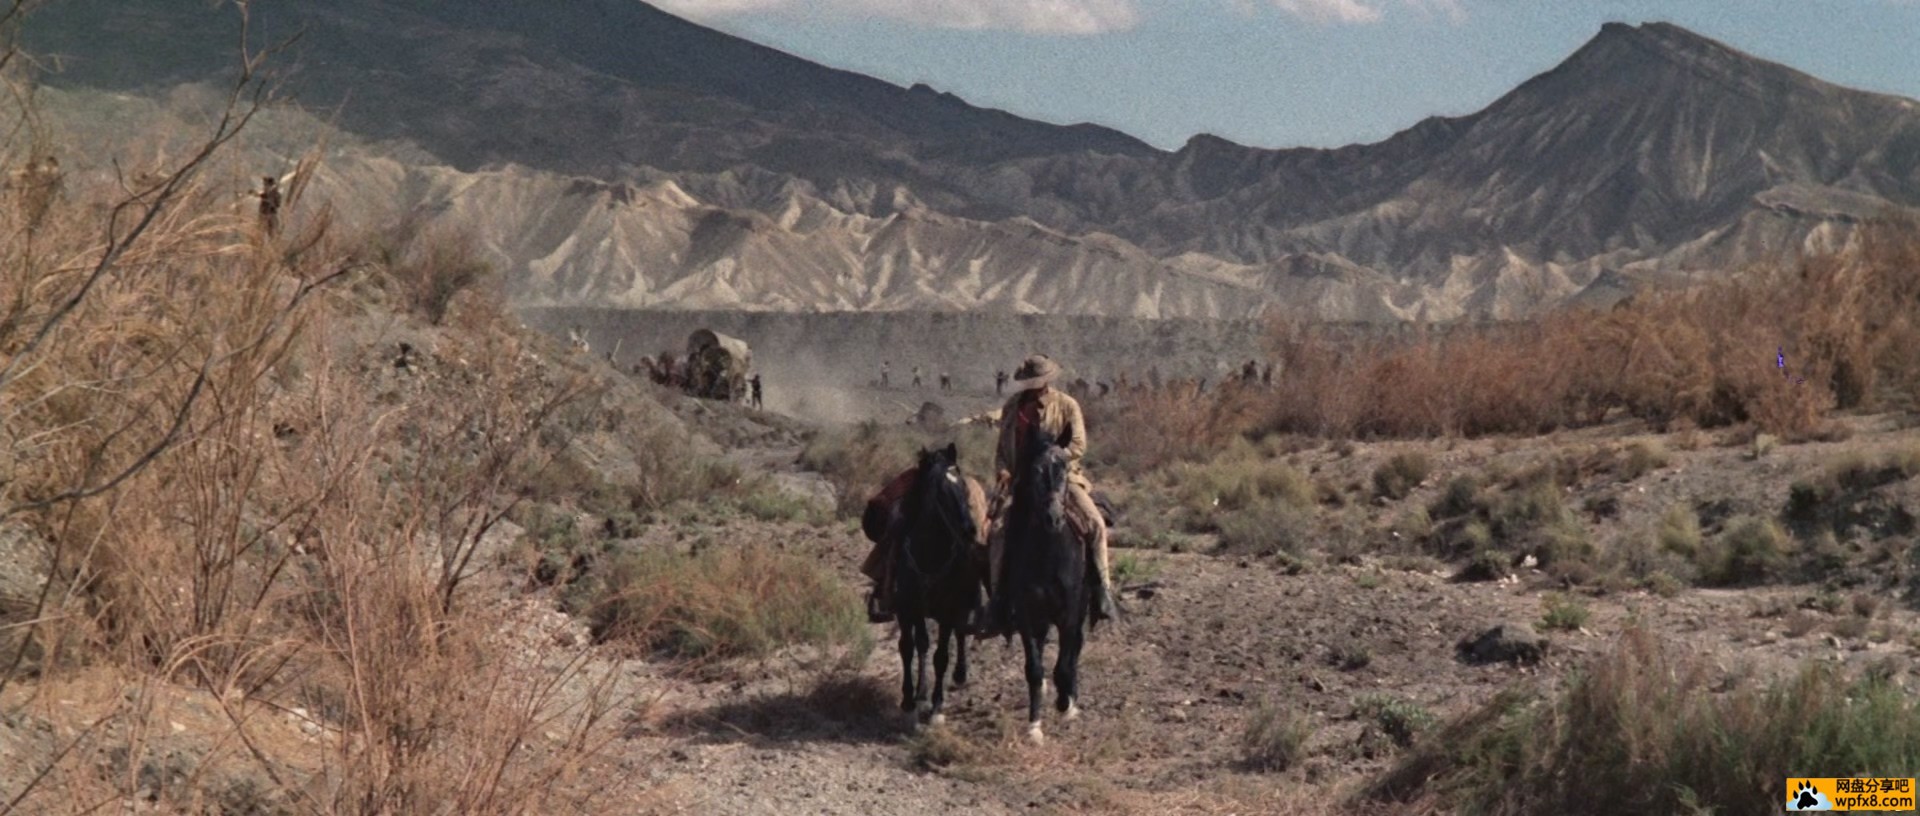 Once.Upon.a.Time.in.the.West.1968.Bluray.1080p.x265.国意英三语.mkv_024305.776.jpg